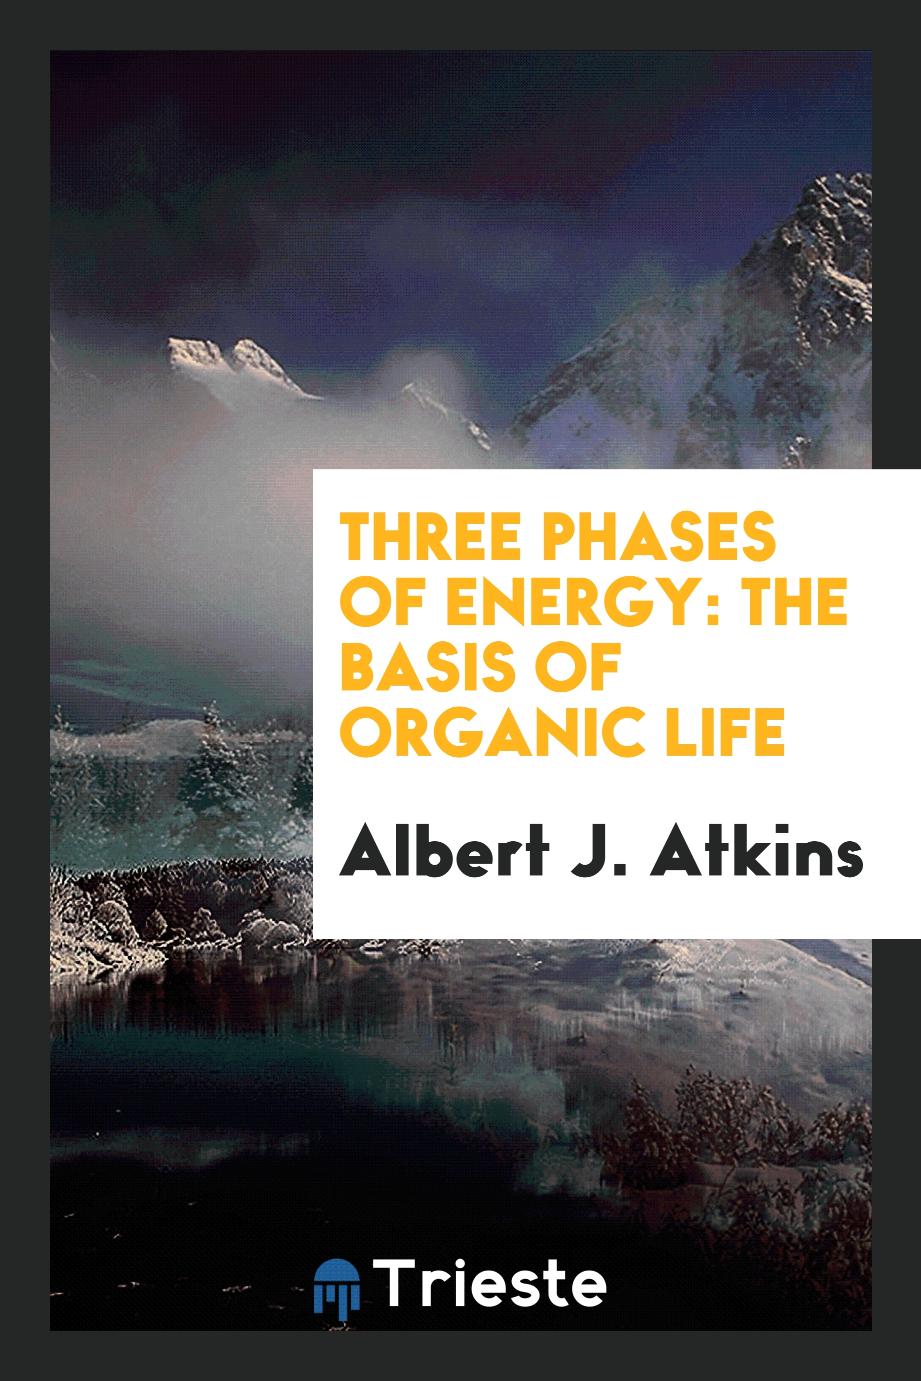 Three phases of energy: the basis of organic life